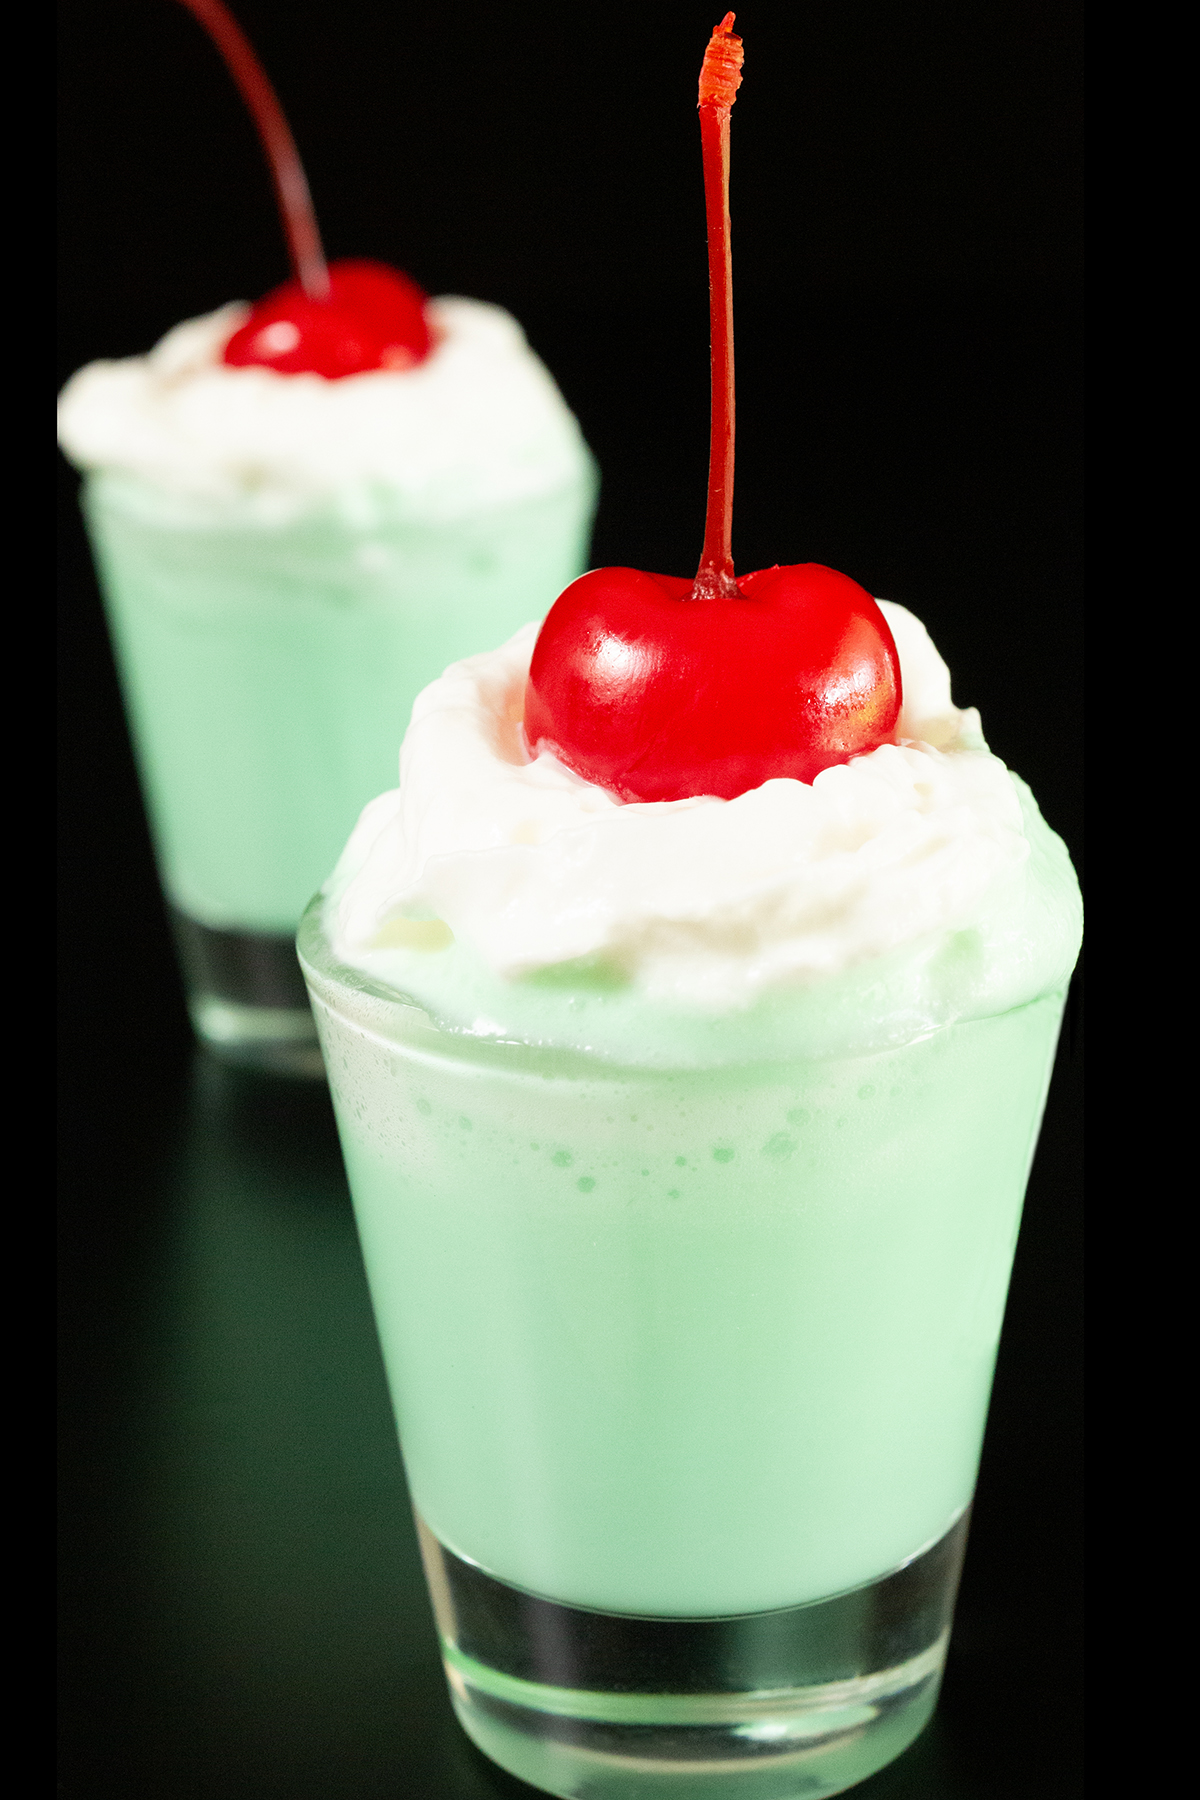 Two shot glasses filled with mint green colored Shamrock Shots are topped with whipped cream and maraschino cherries.